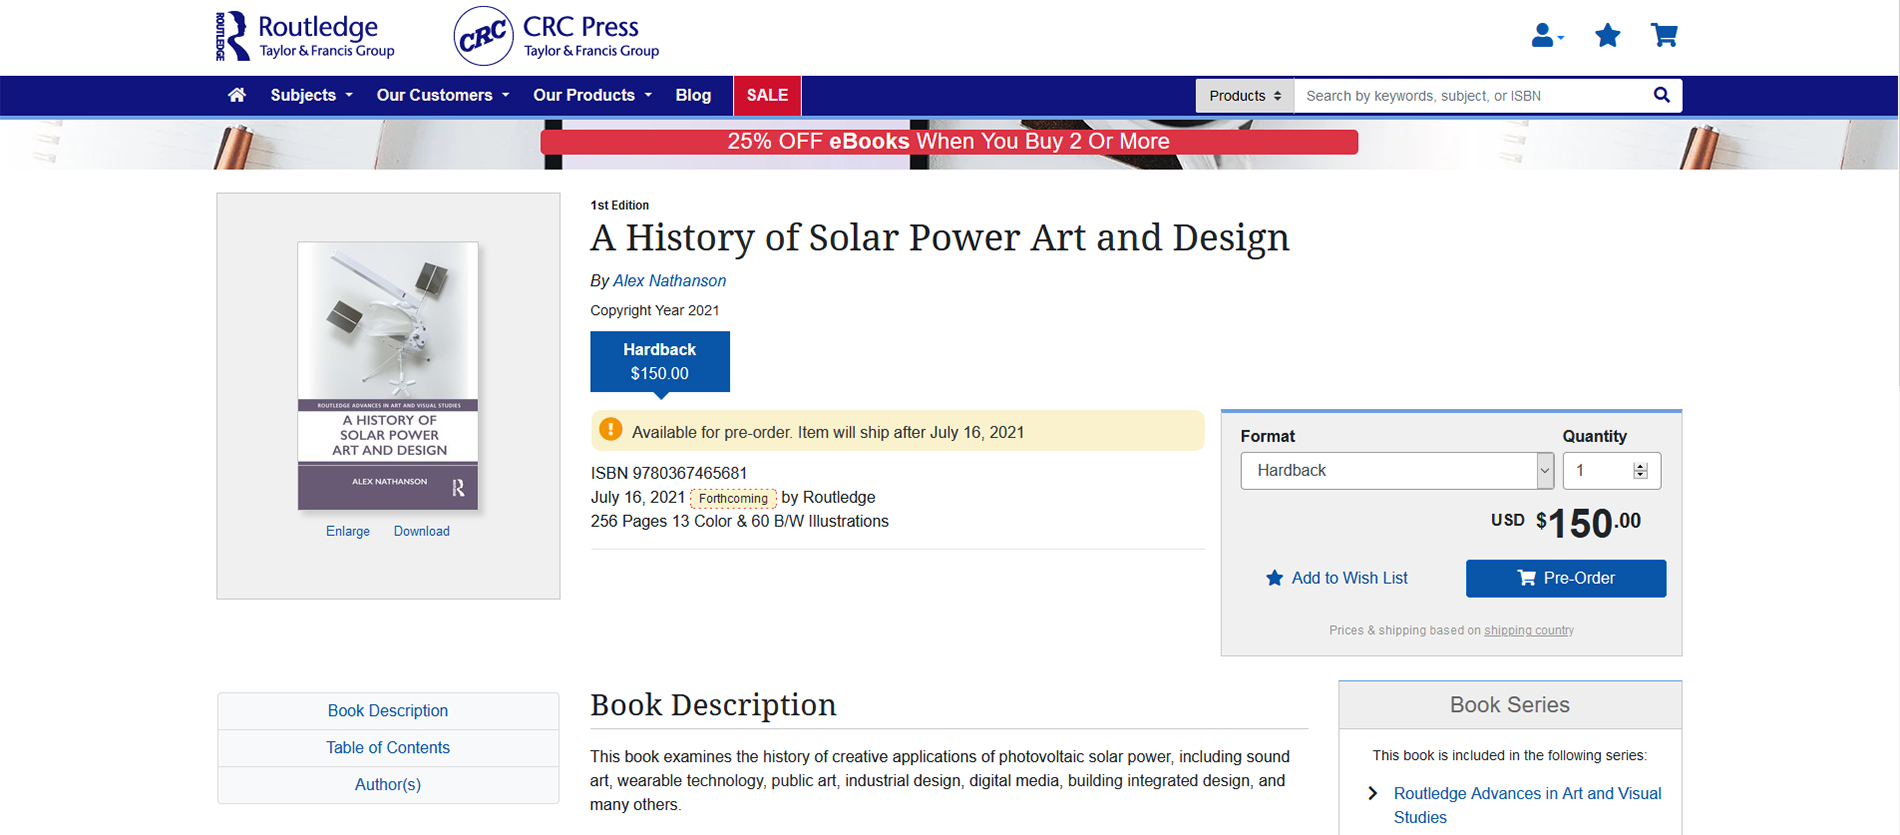 Screen grab from Routledge's website depicting the book A History of Solar Power Art and Design